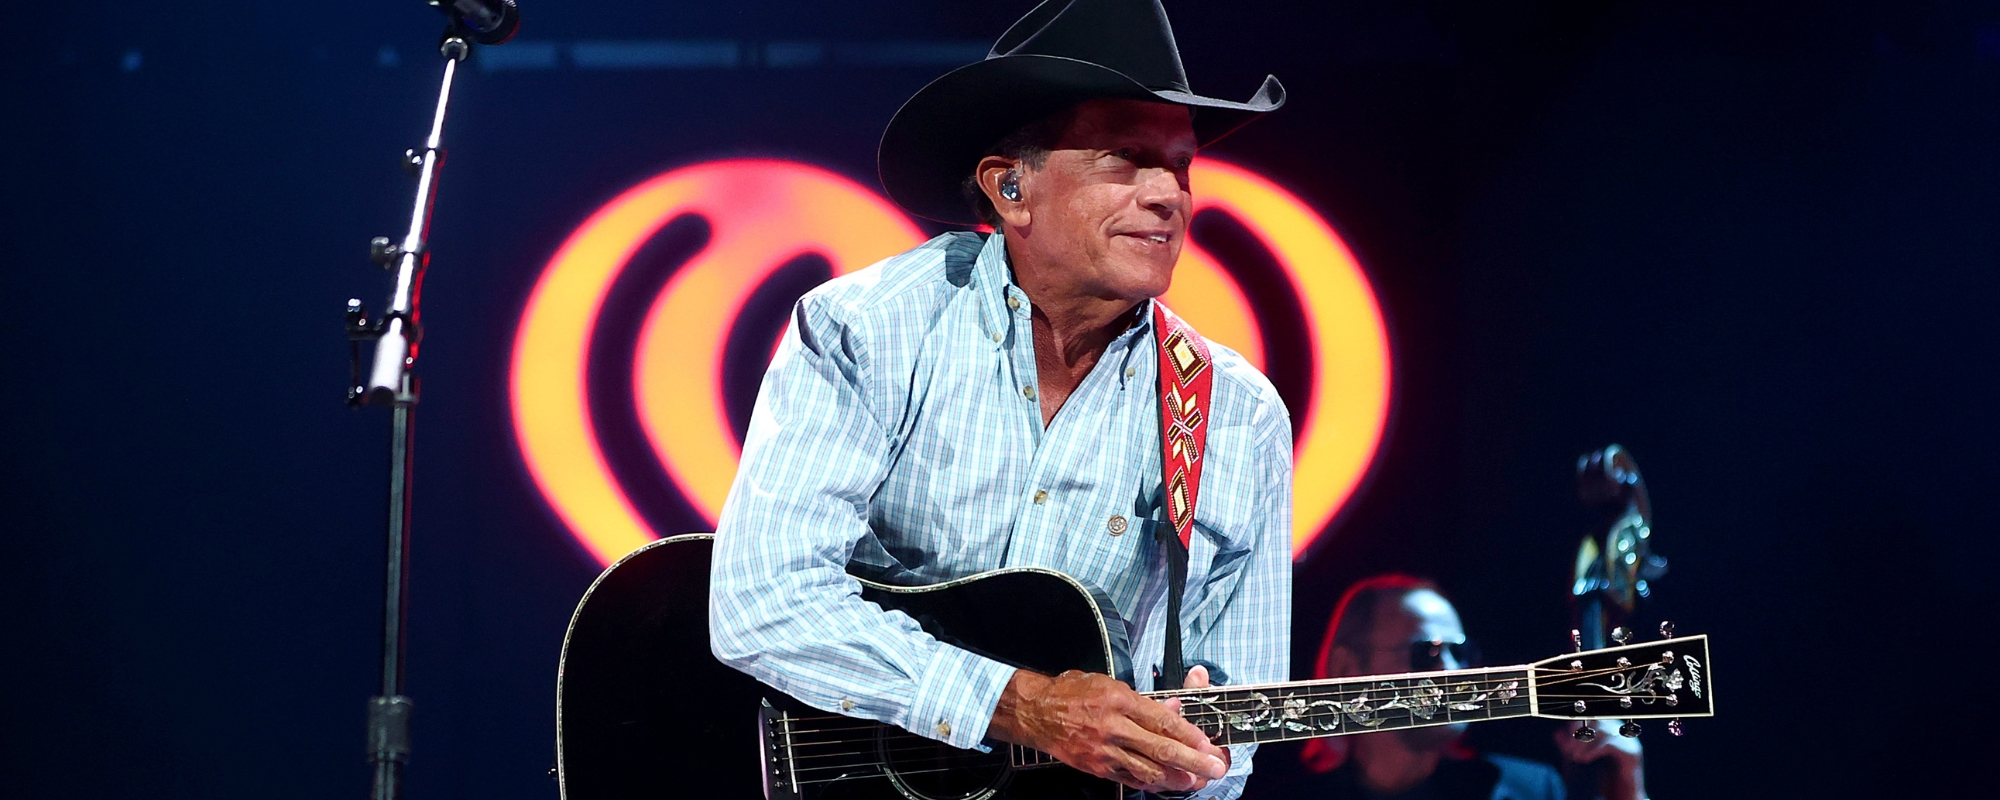 The Heartbreaking Real-Life Story Behind George Strait’s “You’ll Be There”